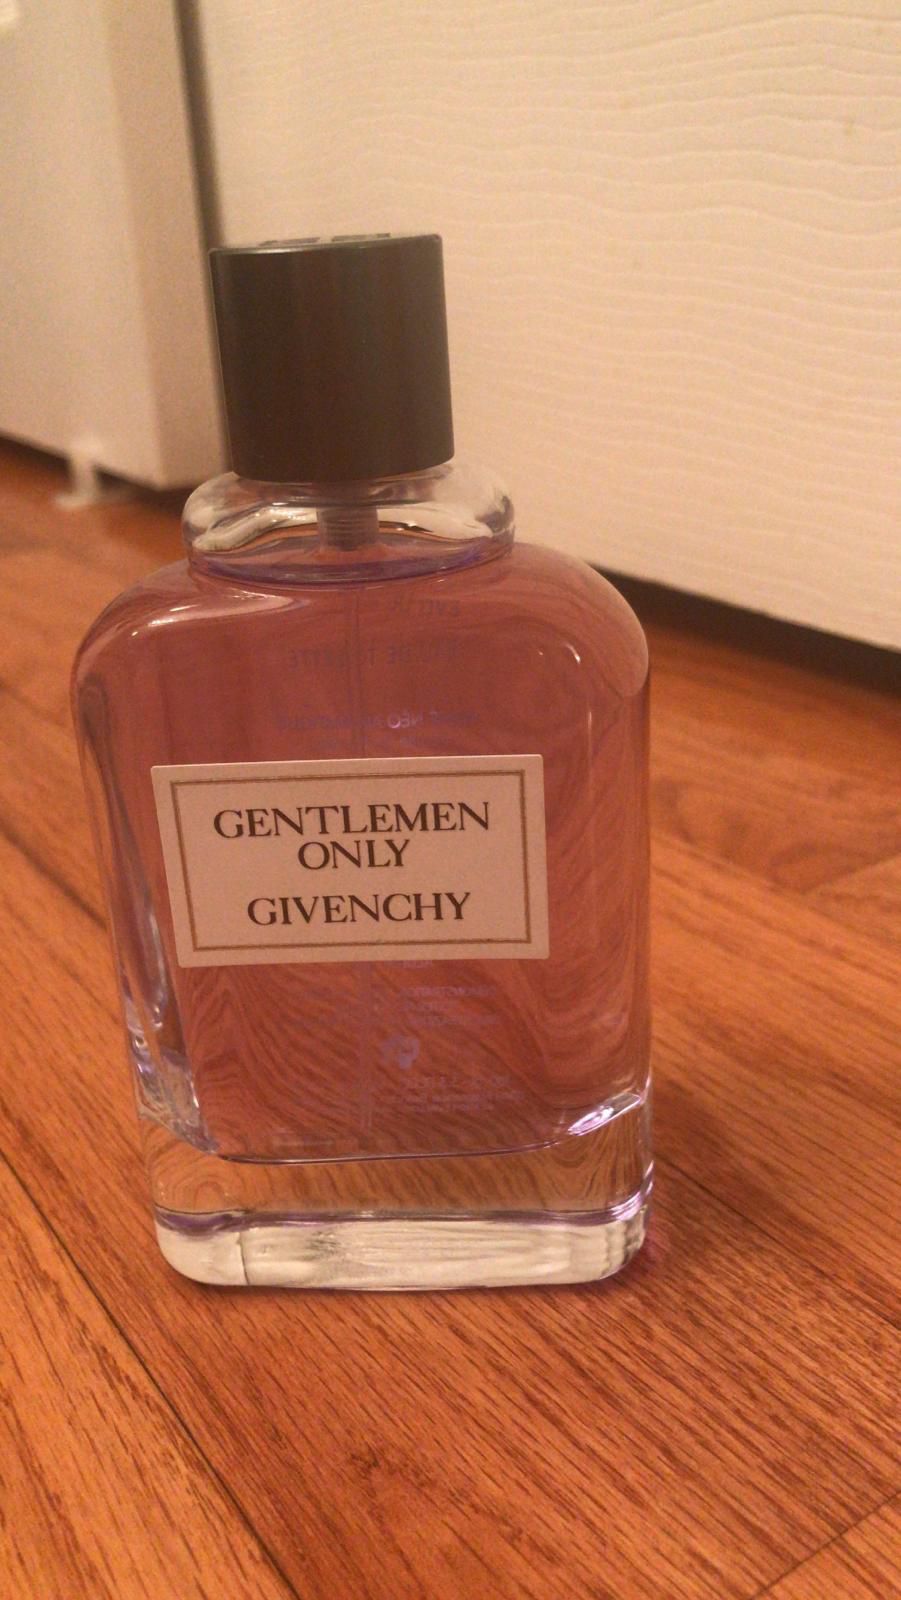 Givenchy clone for men!